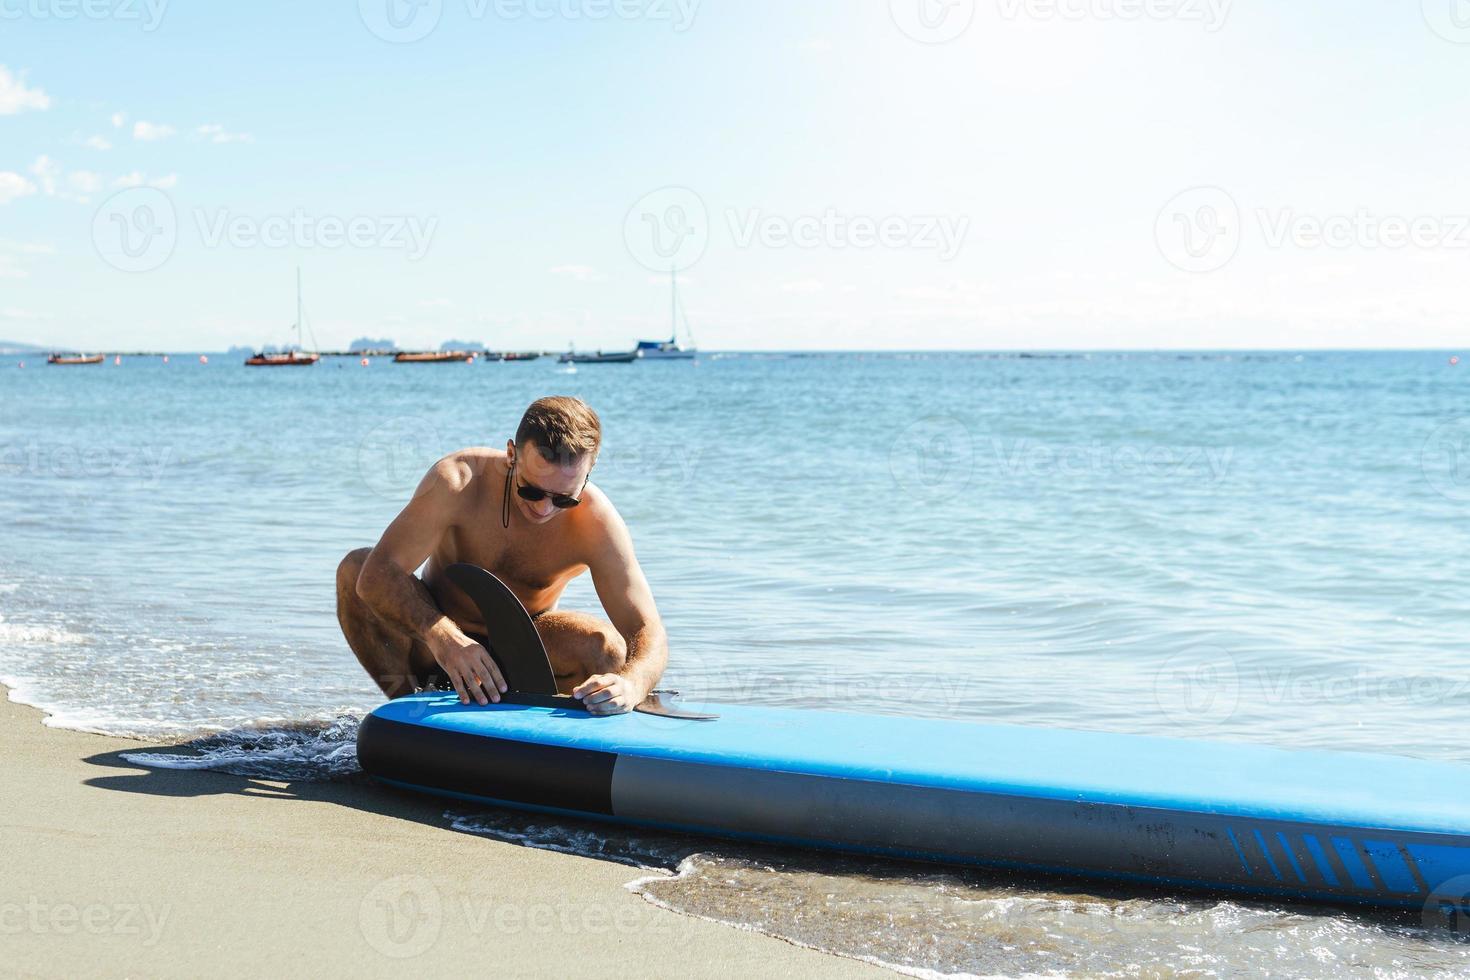 Young male surfer setting up standup paddleboard on a beach. photo